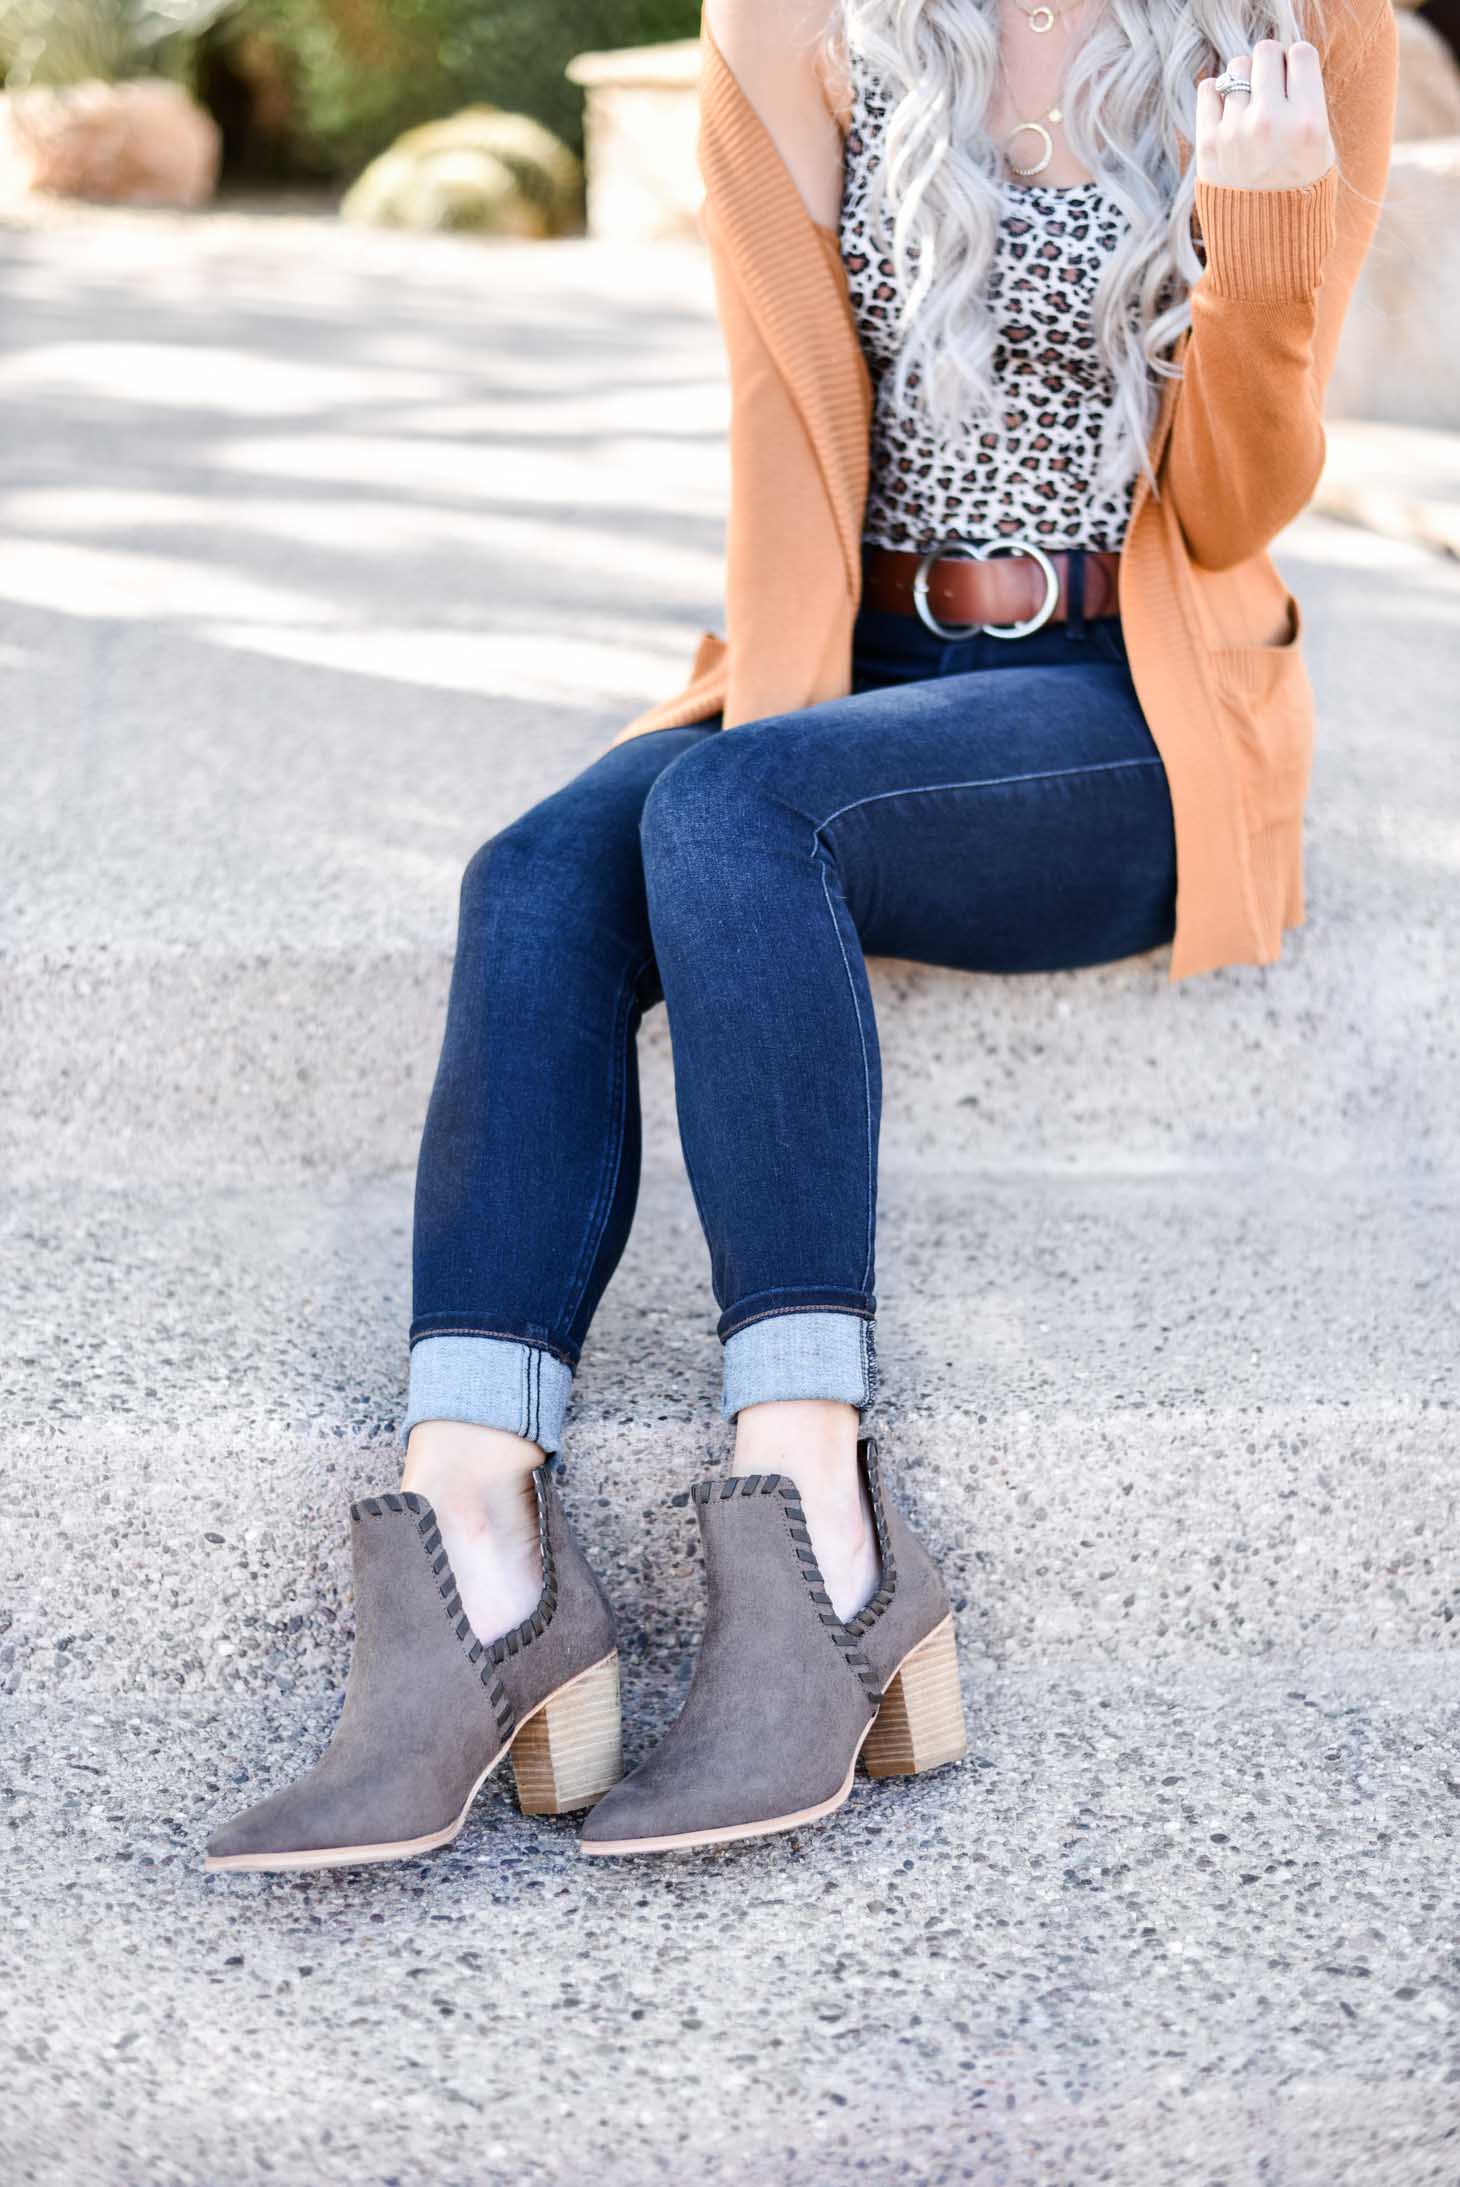 Erin Elizabeth of Wink and a Twirl share the perfect leopard tank with a must have cardigan from Pink Lily Boutique and Mi Mi Shoes